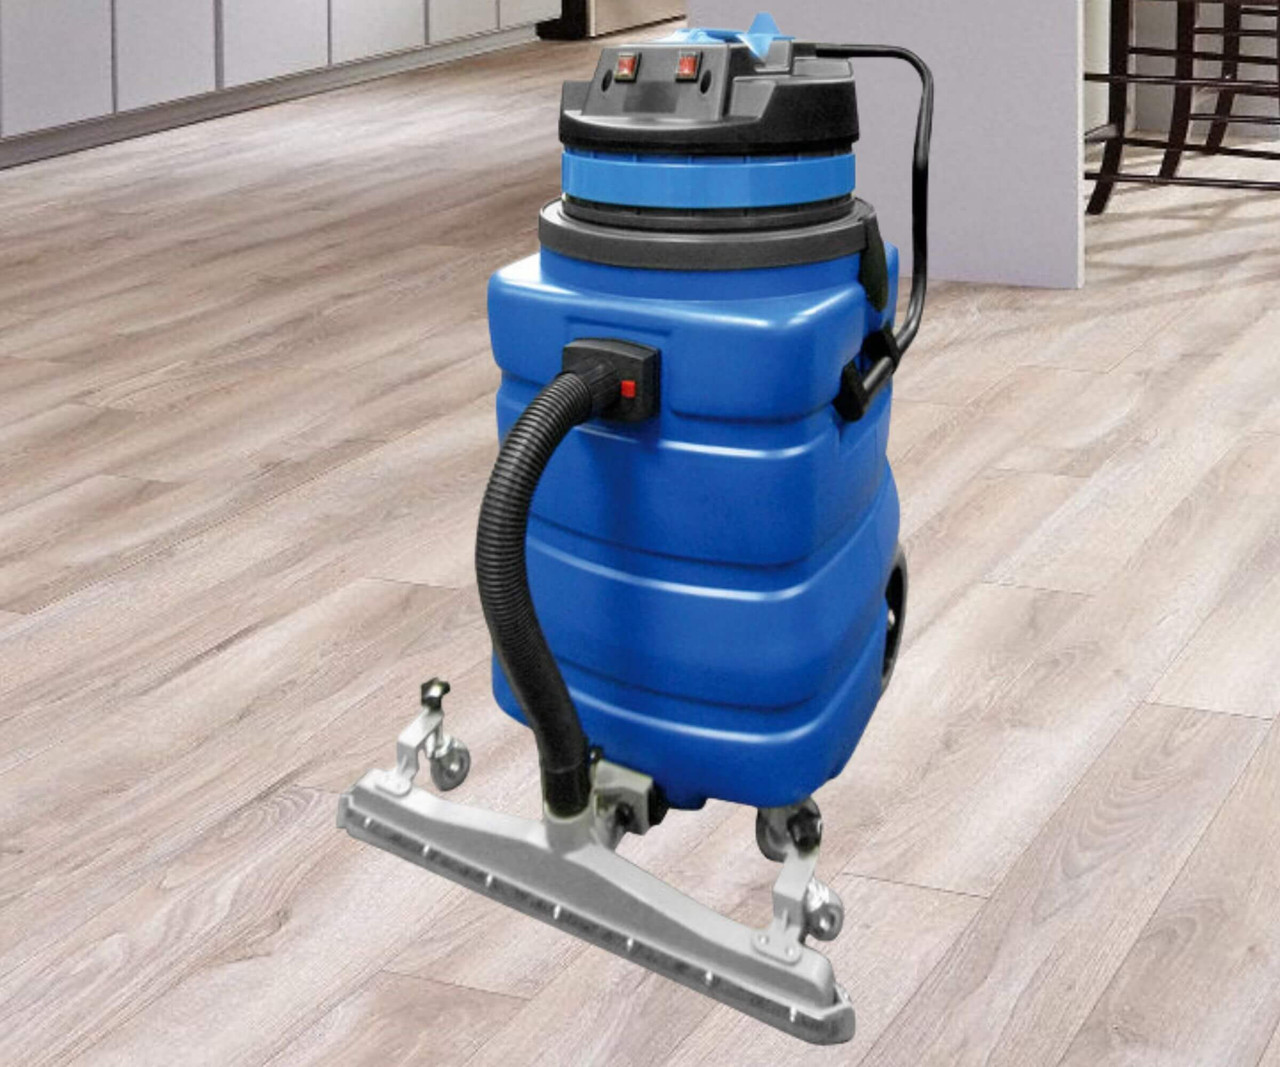 Perfect Products 23 Gallon Polyethylene Wet/Dry Vacuum with Toolkit - Ultimate Cleaning Capacity and Versatility